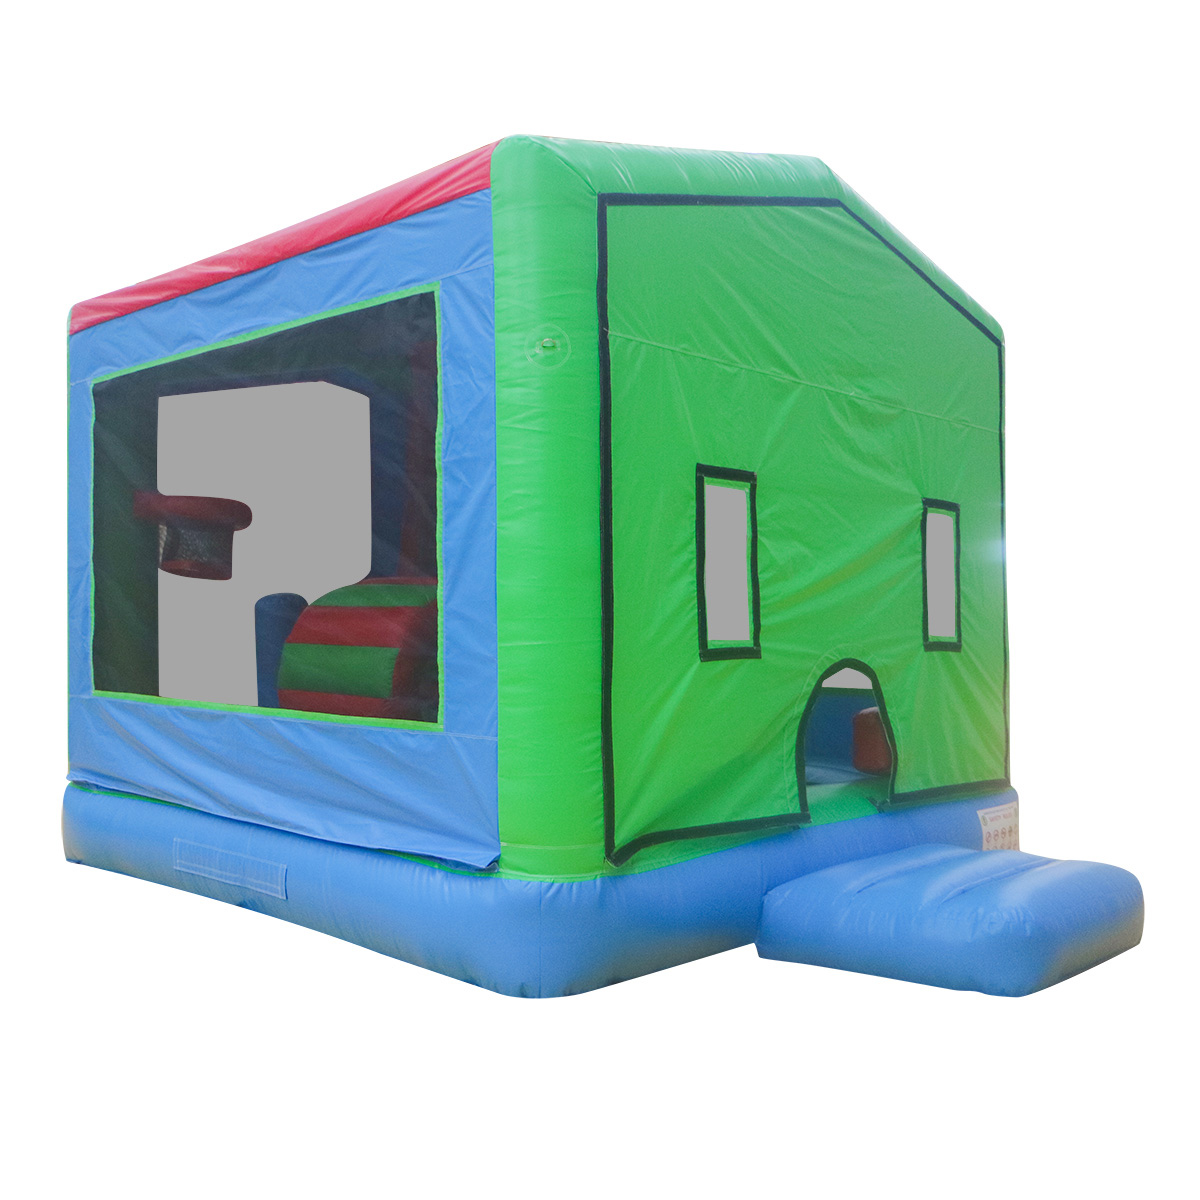 Commercial Simple Inflatable Bounce HouseYG-103